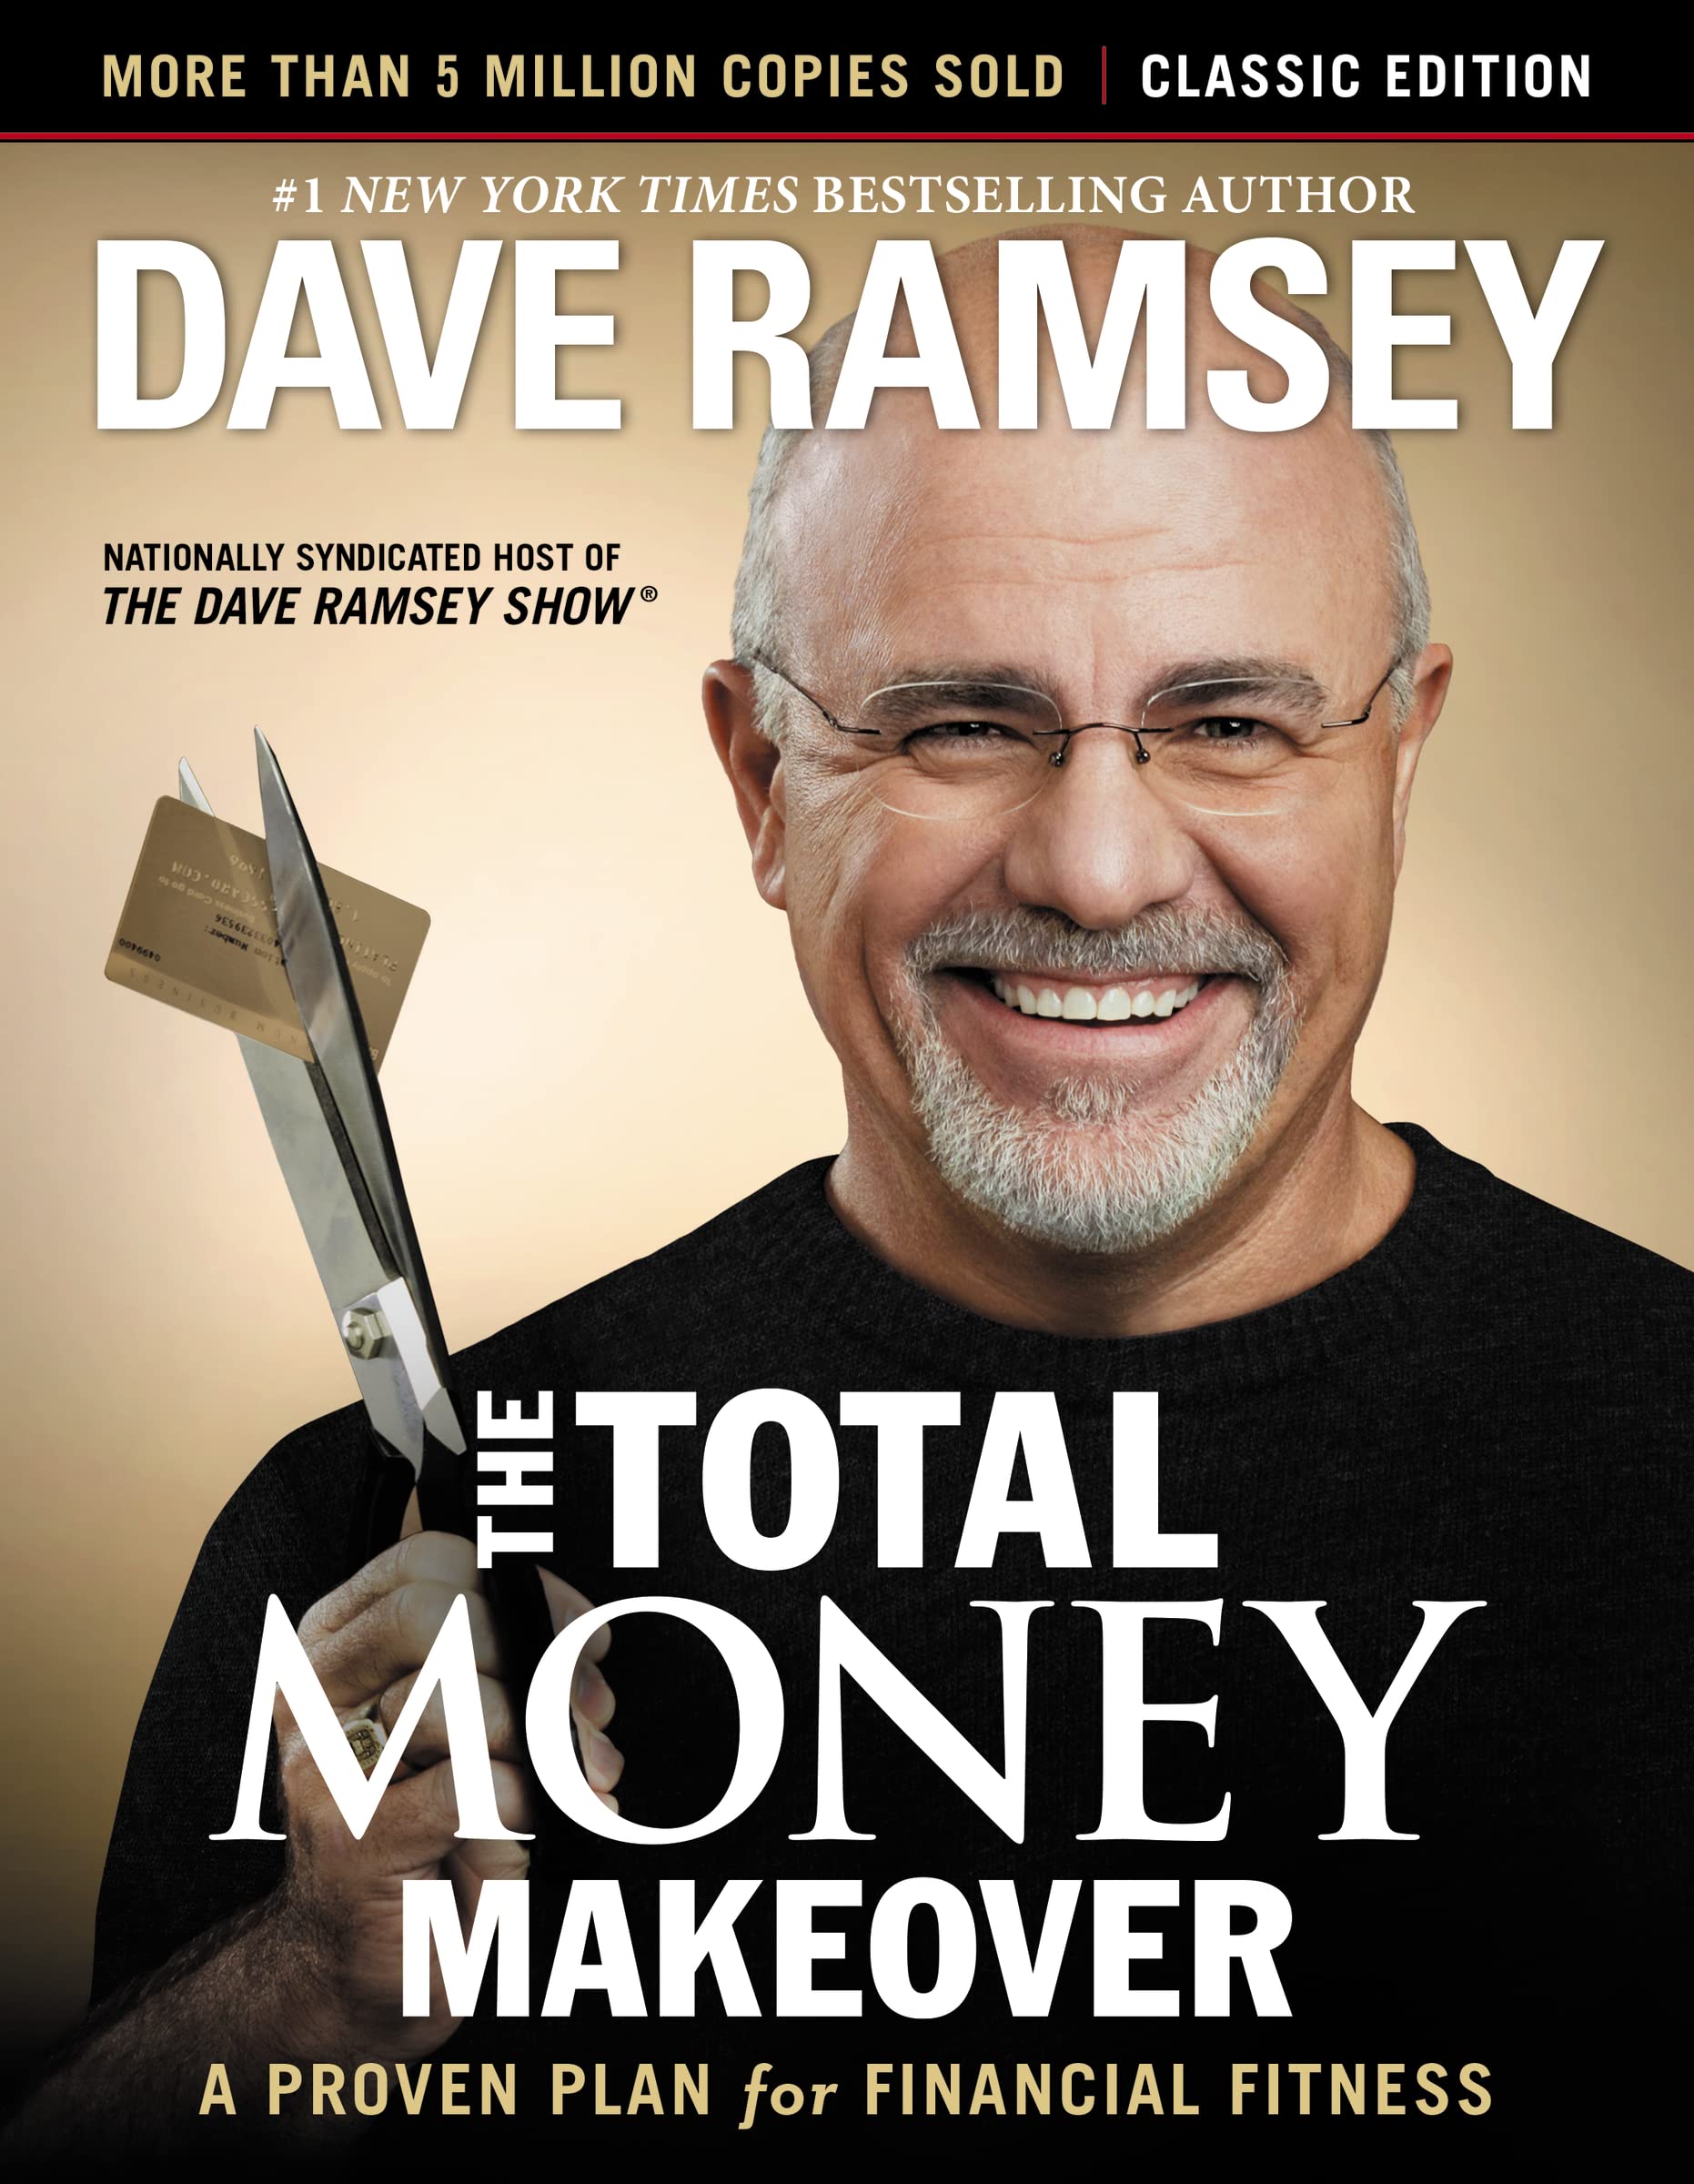 The Total Money Makeover: A Proven Plan for Financial Fitness by Dave Ramsey book review